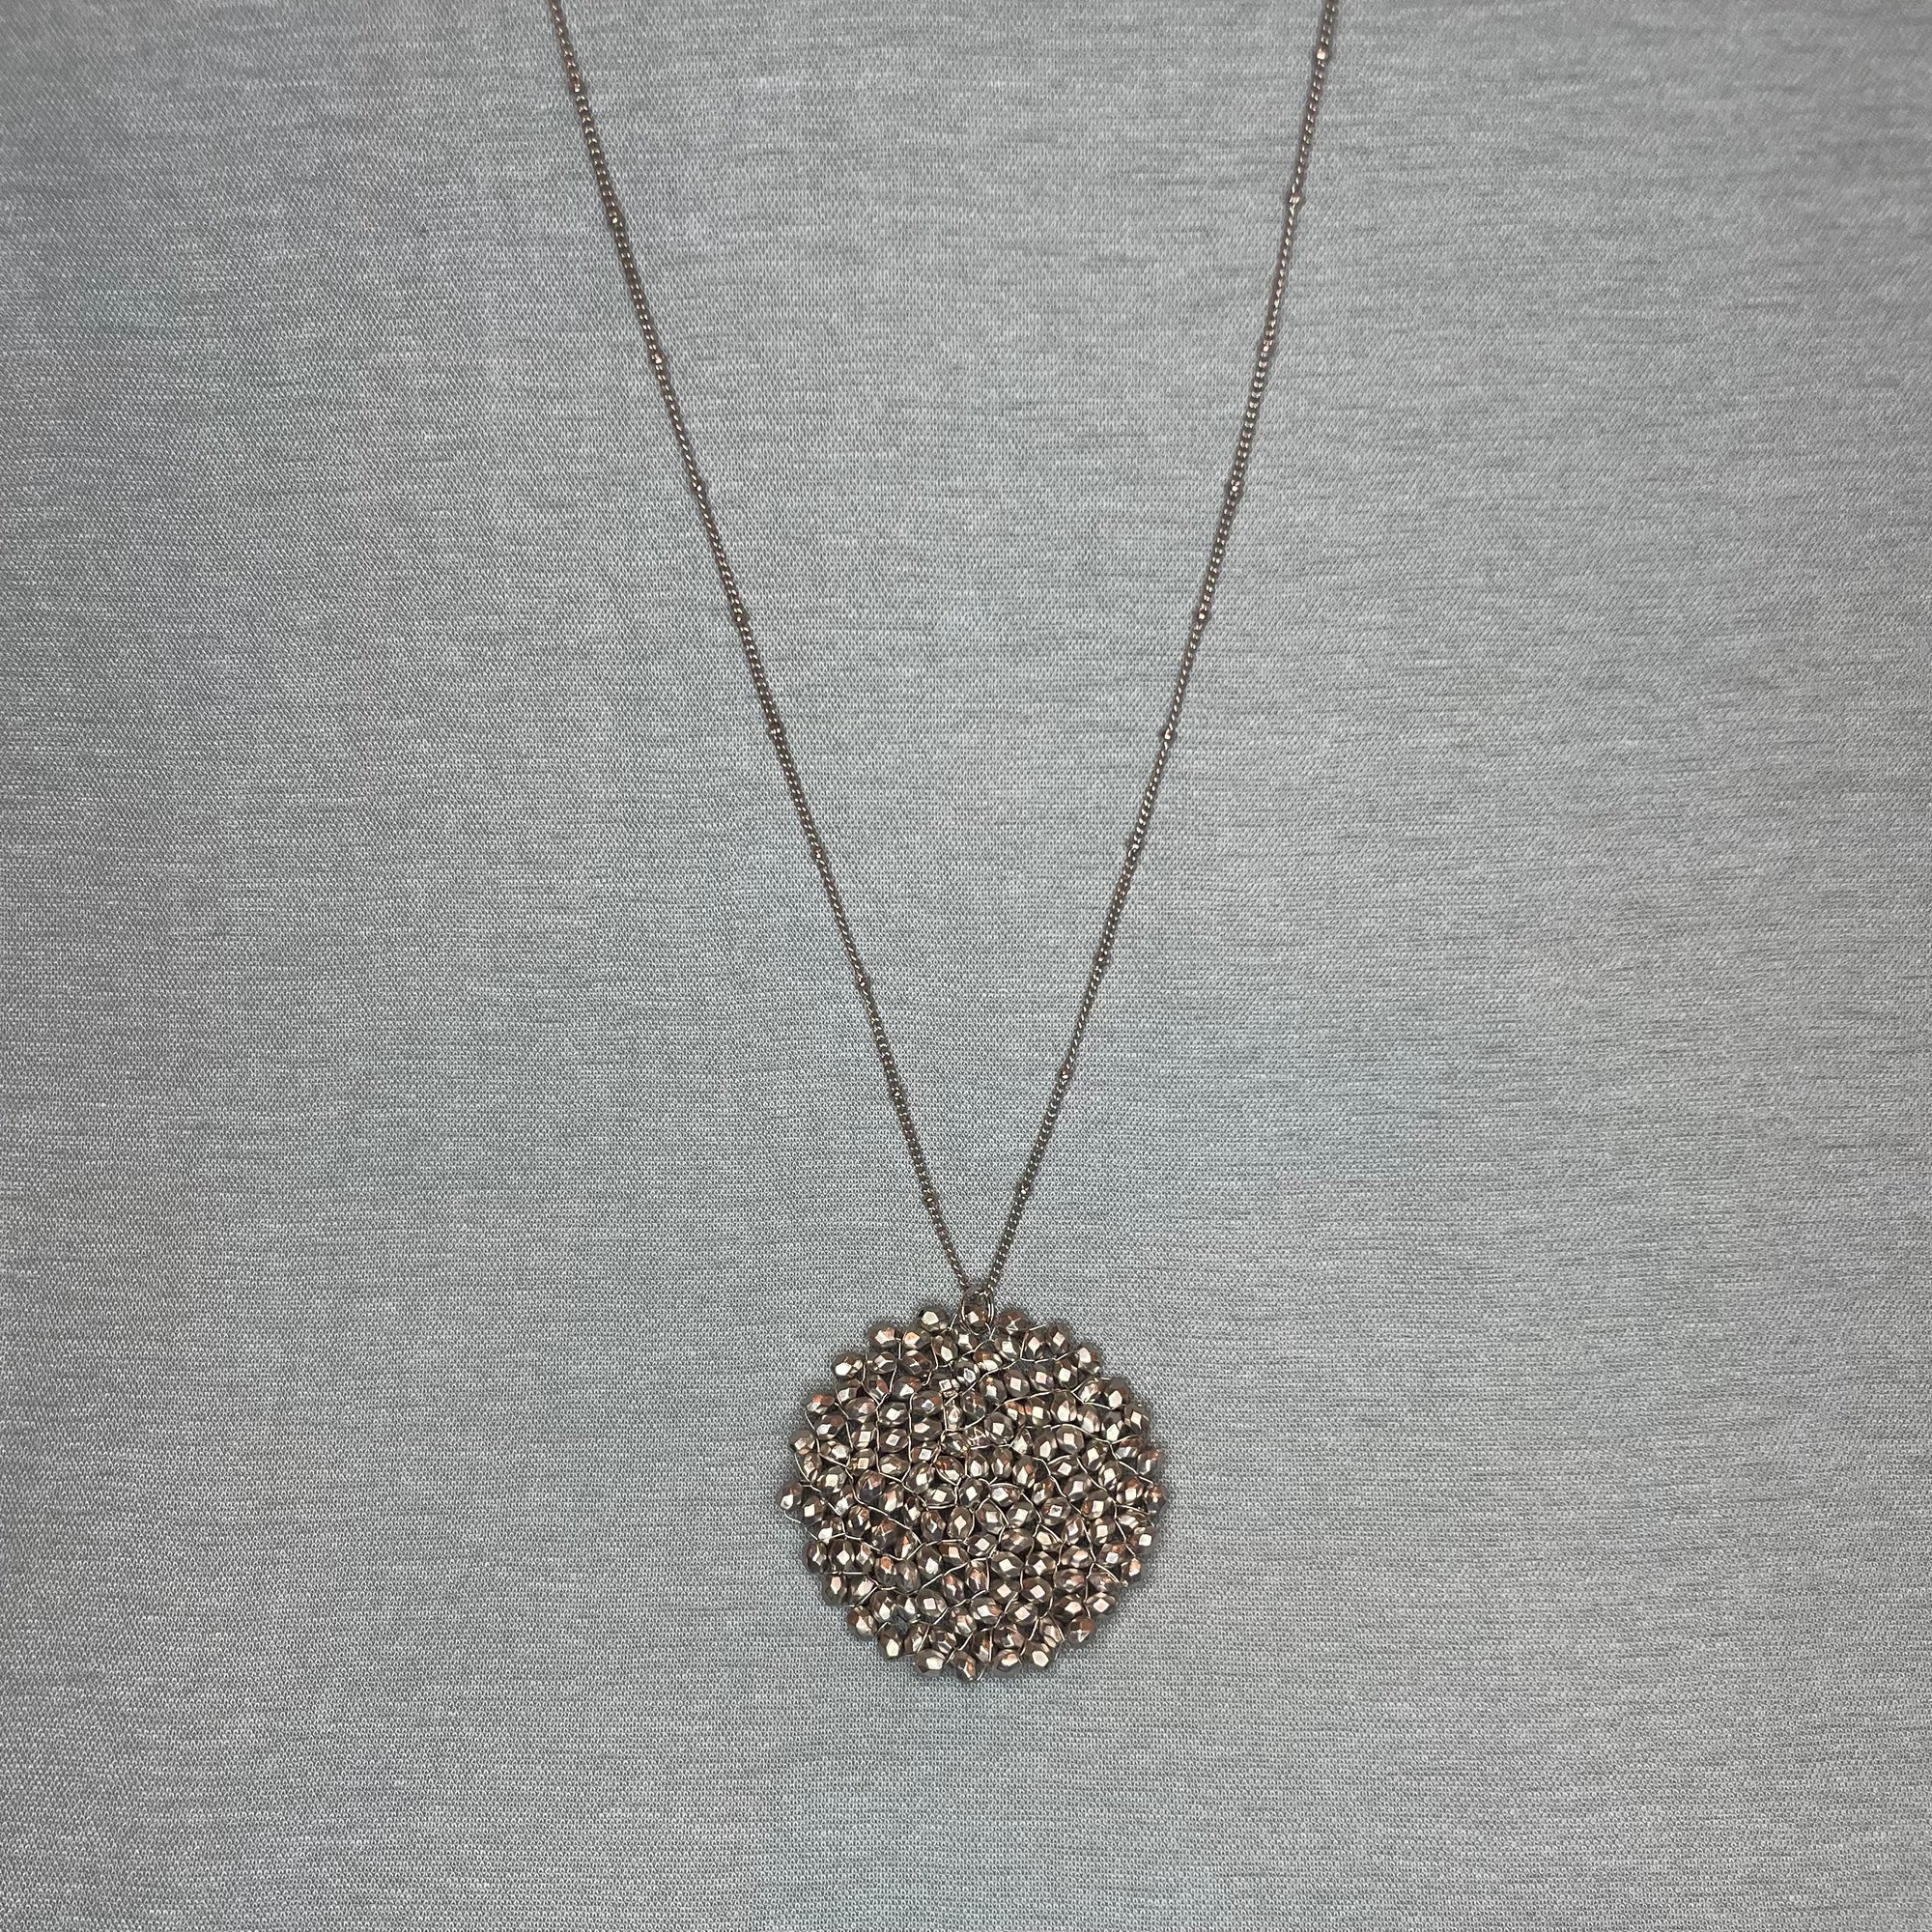 Necklace - Faceted Metallic Crystal Circle